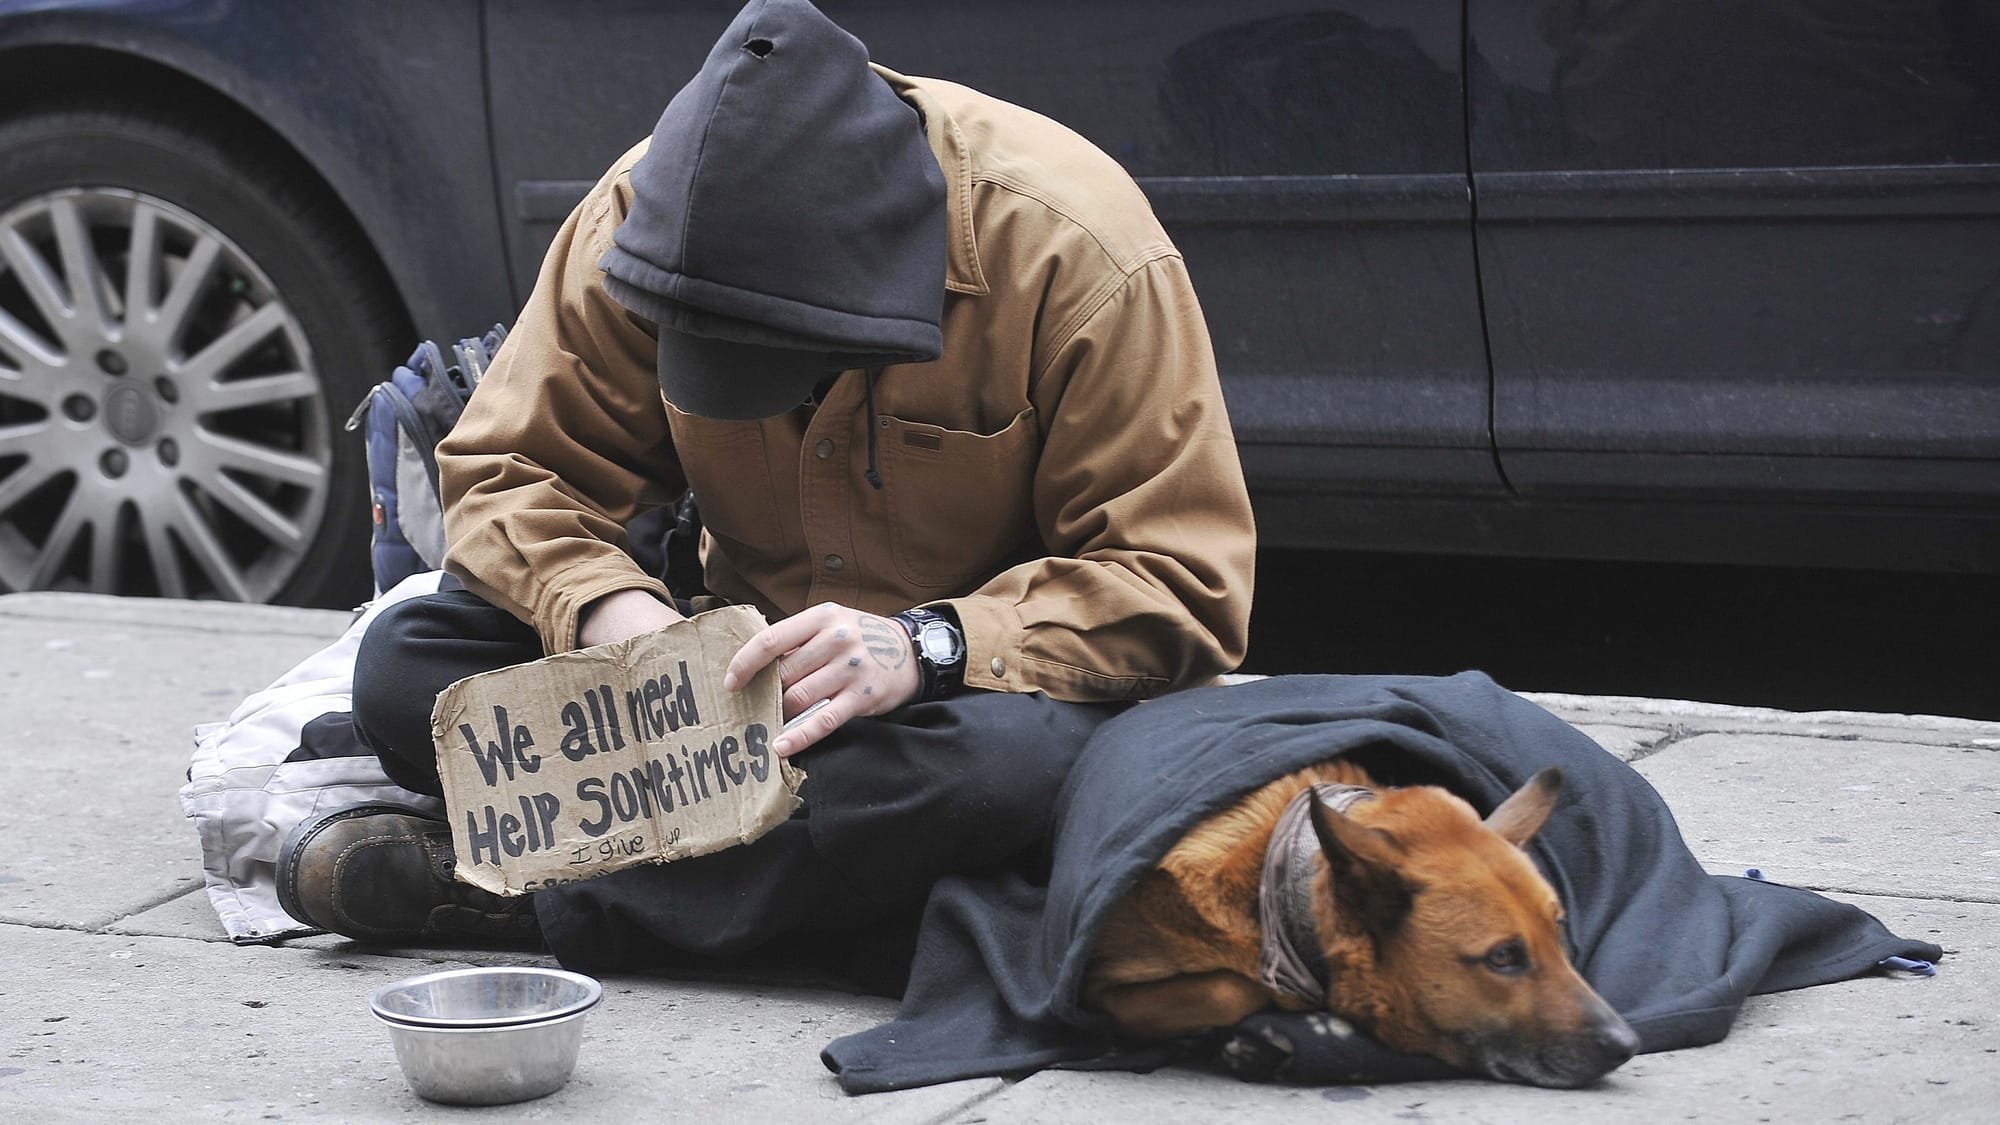 HOMELESSNESS: THE VICIOUS CYCLE